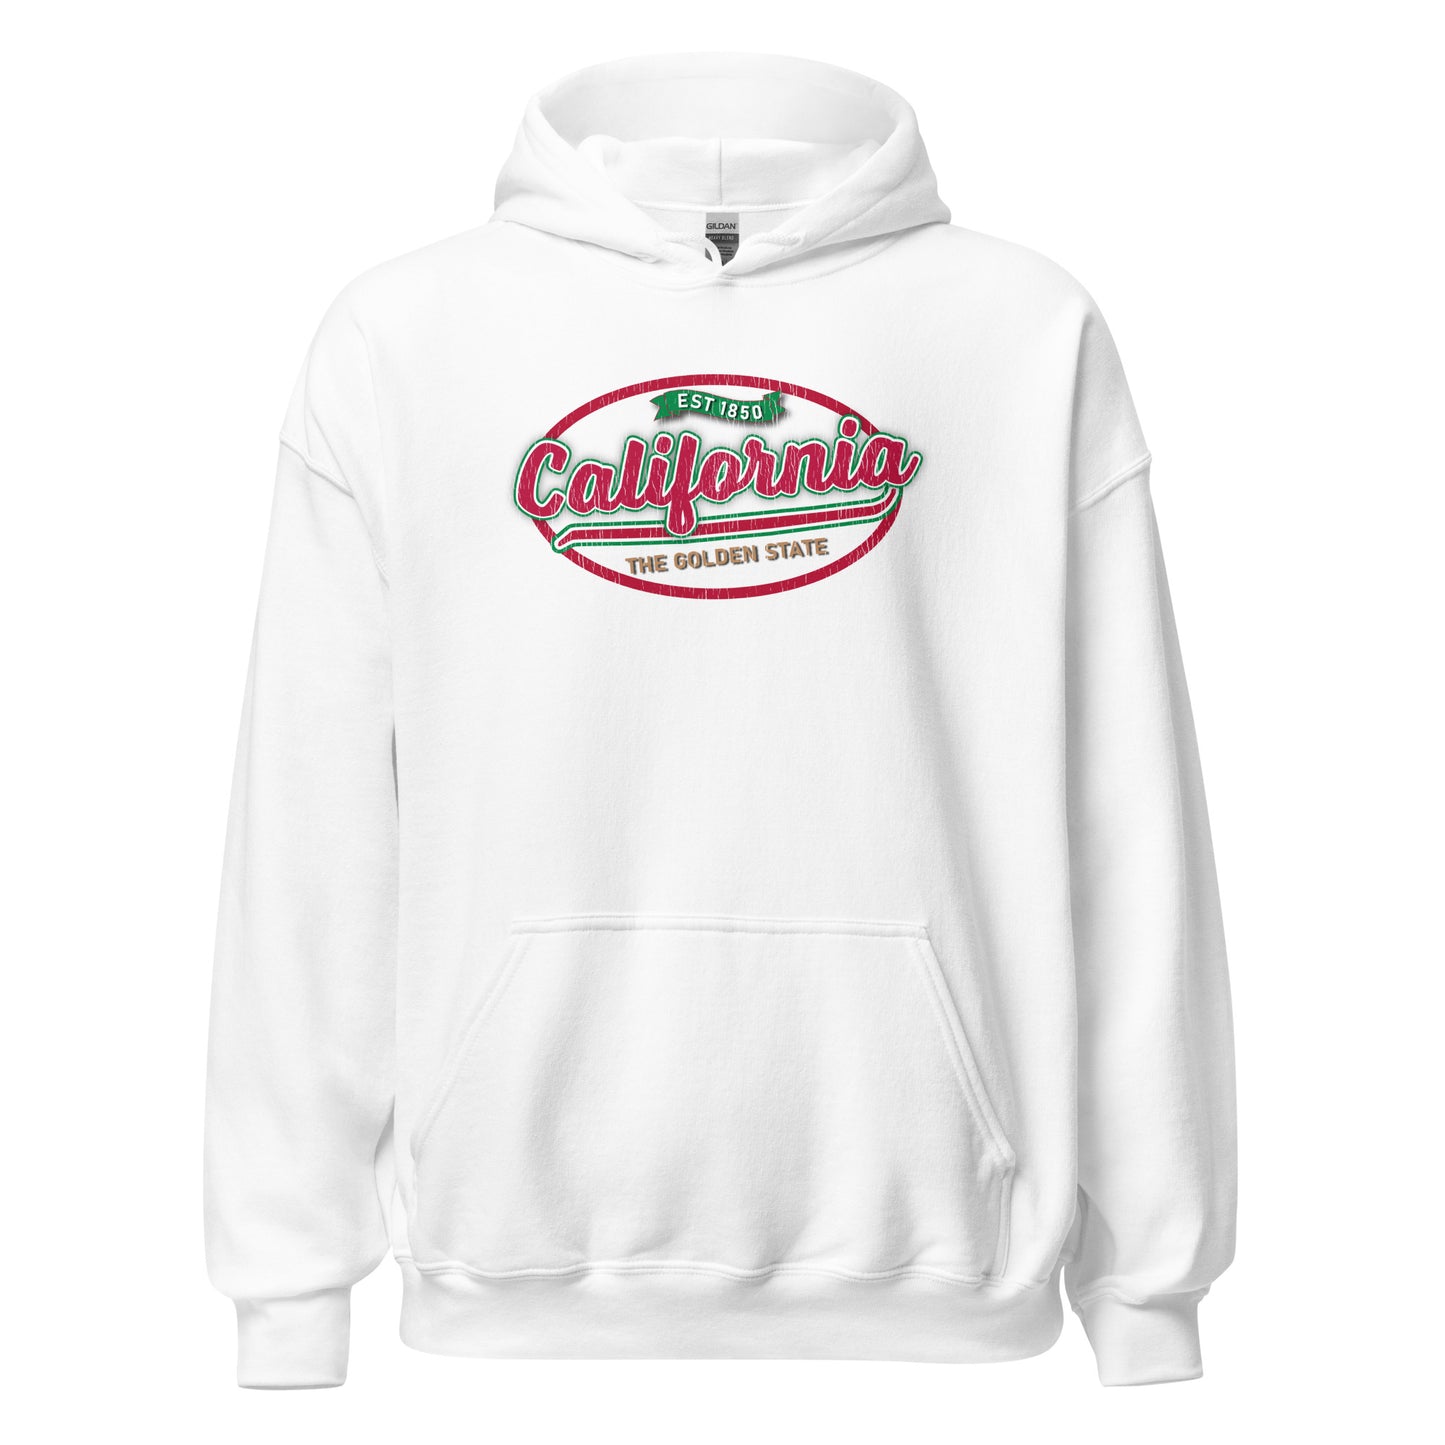 California "The Golden State" Hoodie